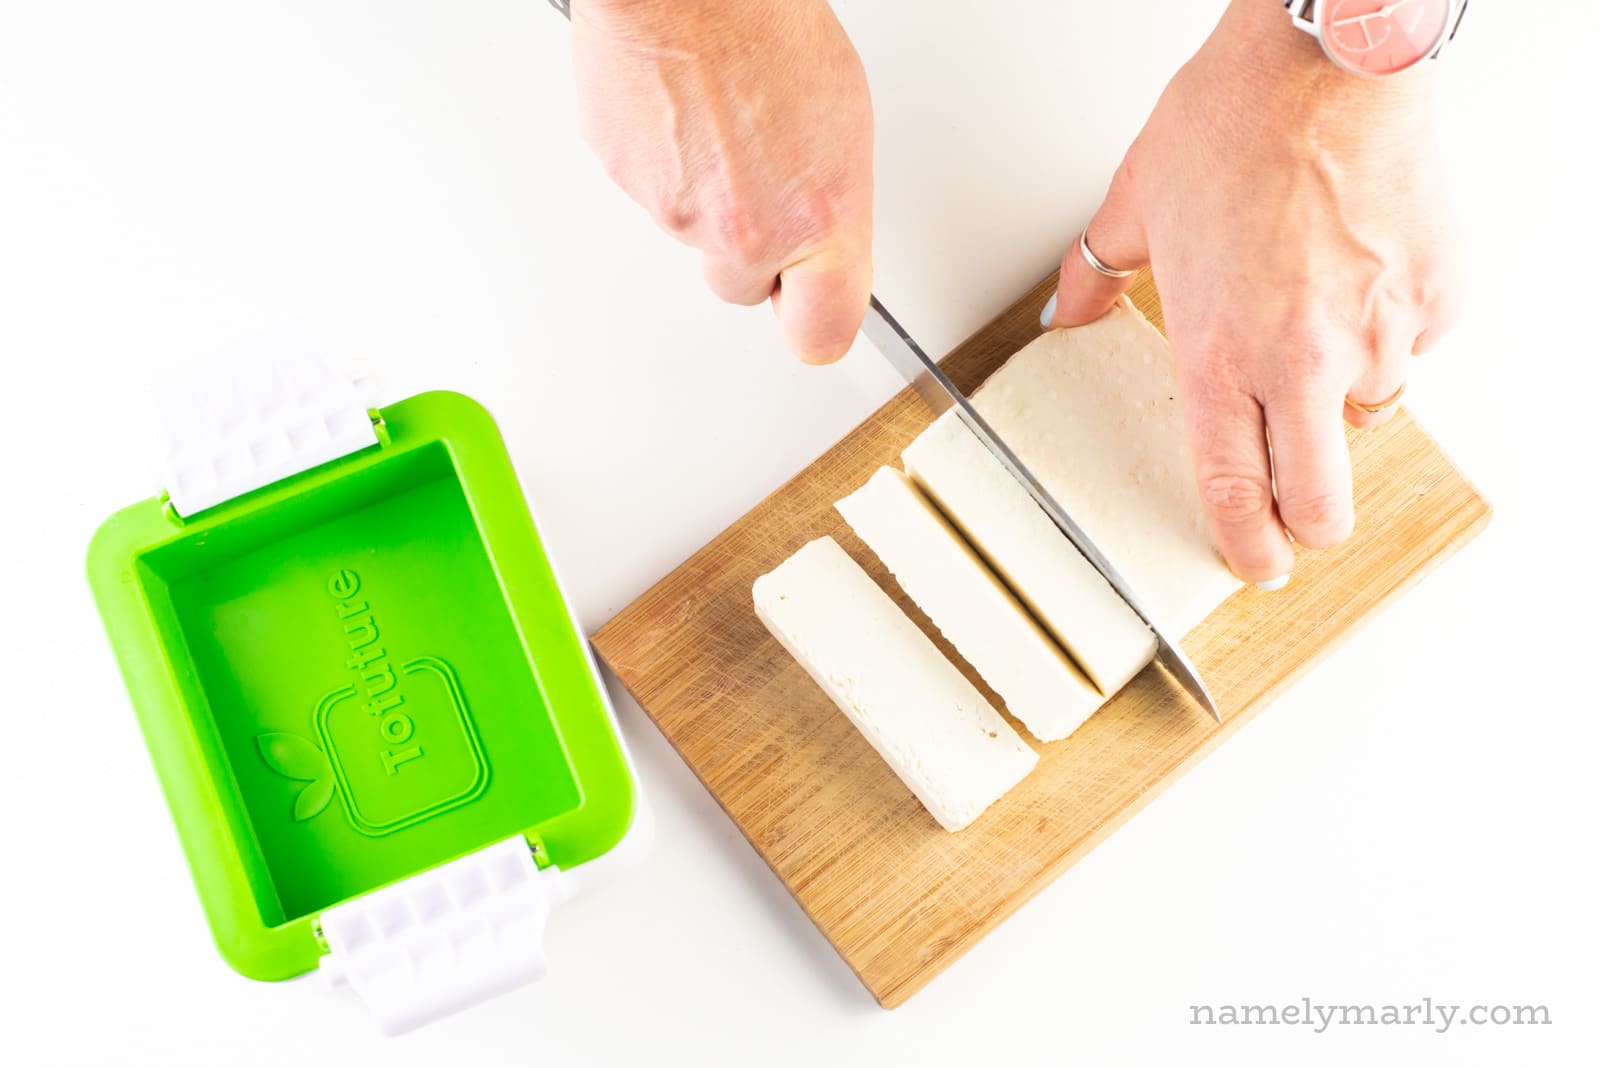 A hand holds a knife and is cutting tofu. It's sitting next to a tofu presser.